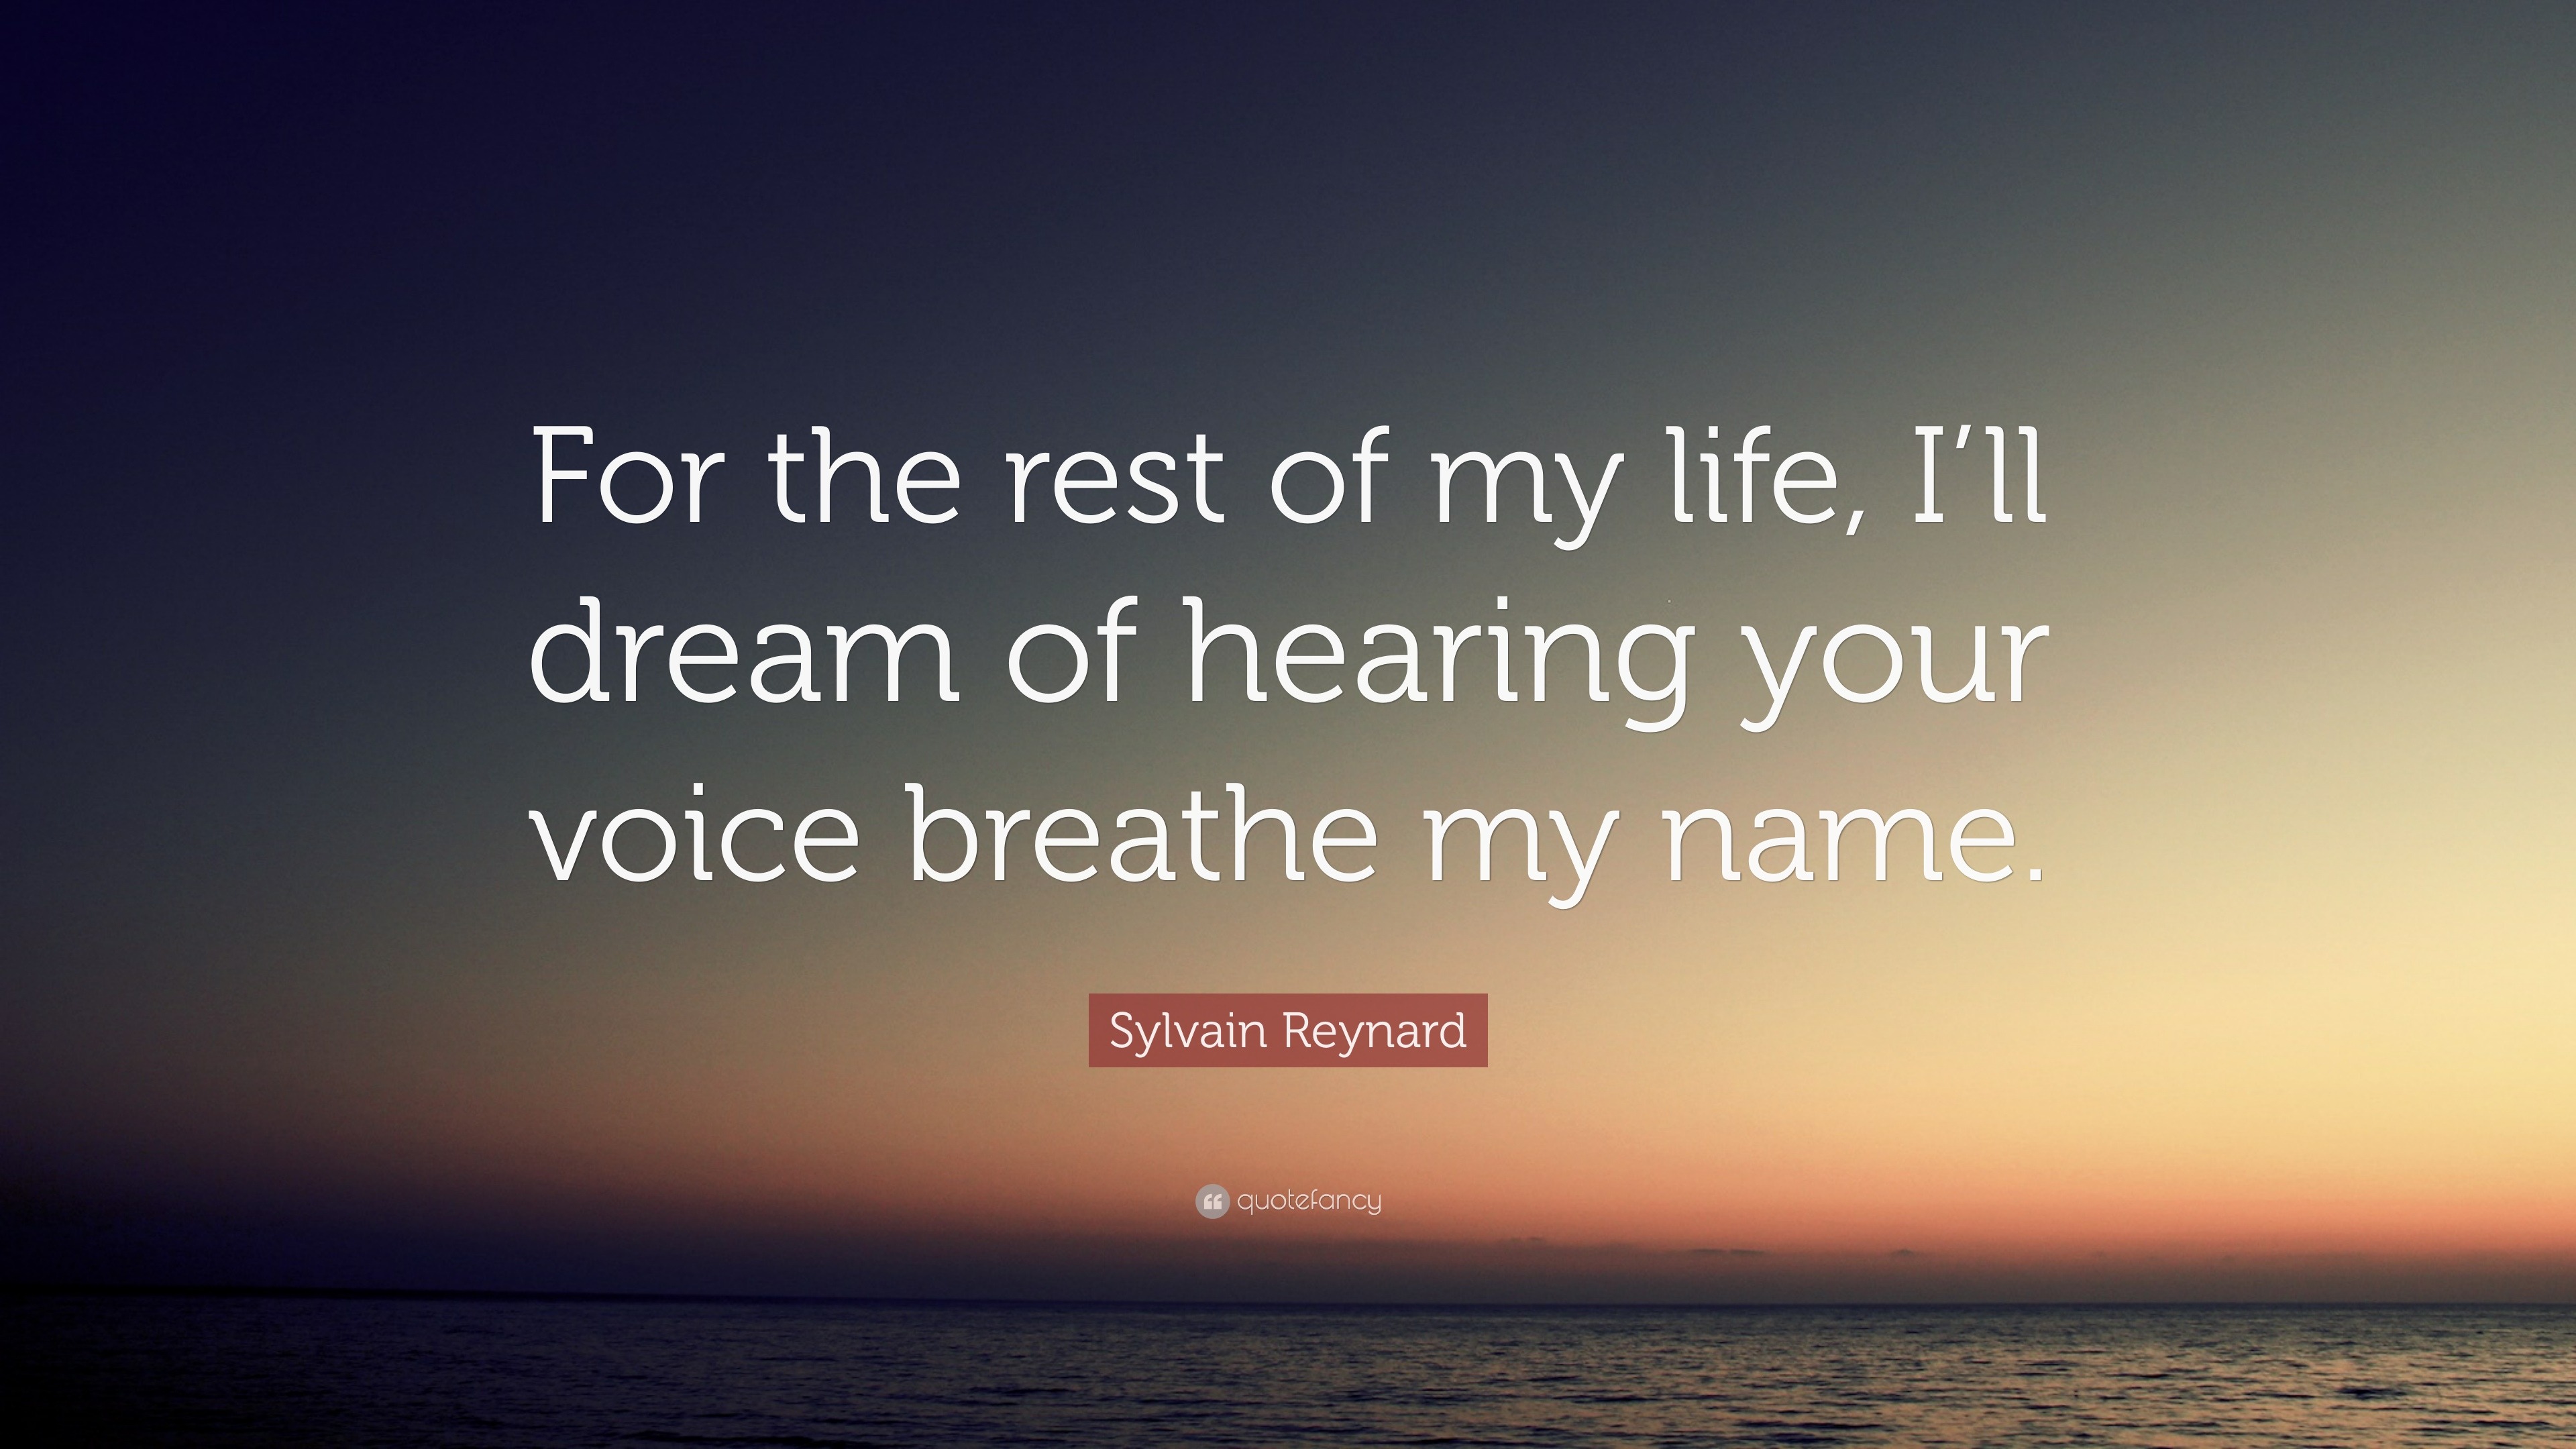 Sylvain Reynard Quote “for The Rest Of My Life Ill Dream Of Hearing Your Voice Breathe My Name” 